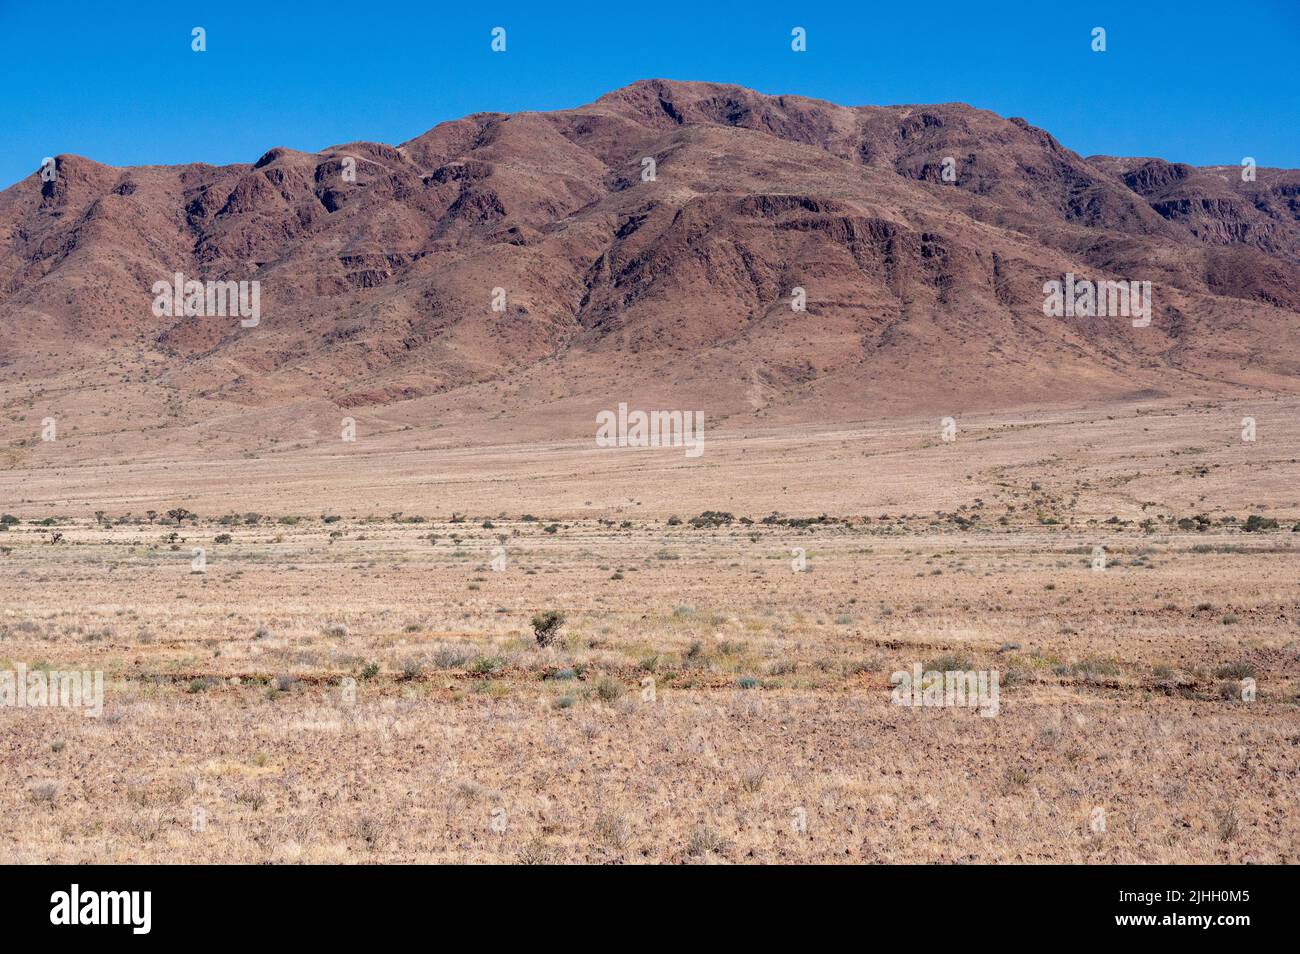 Panoramic view of desert plains in Namibia Africa with hills and mountains in the background Stock Photo